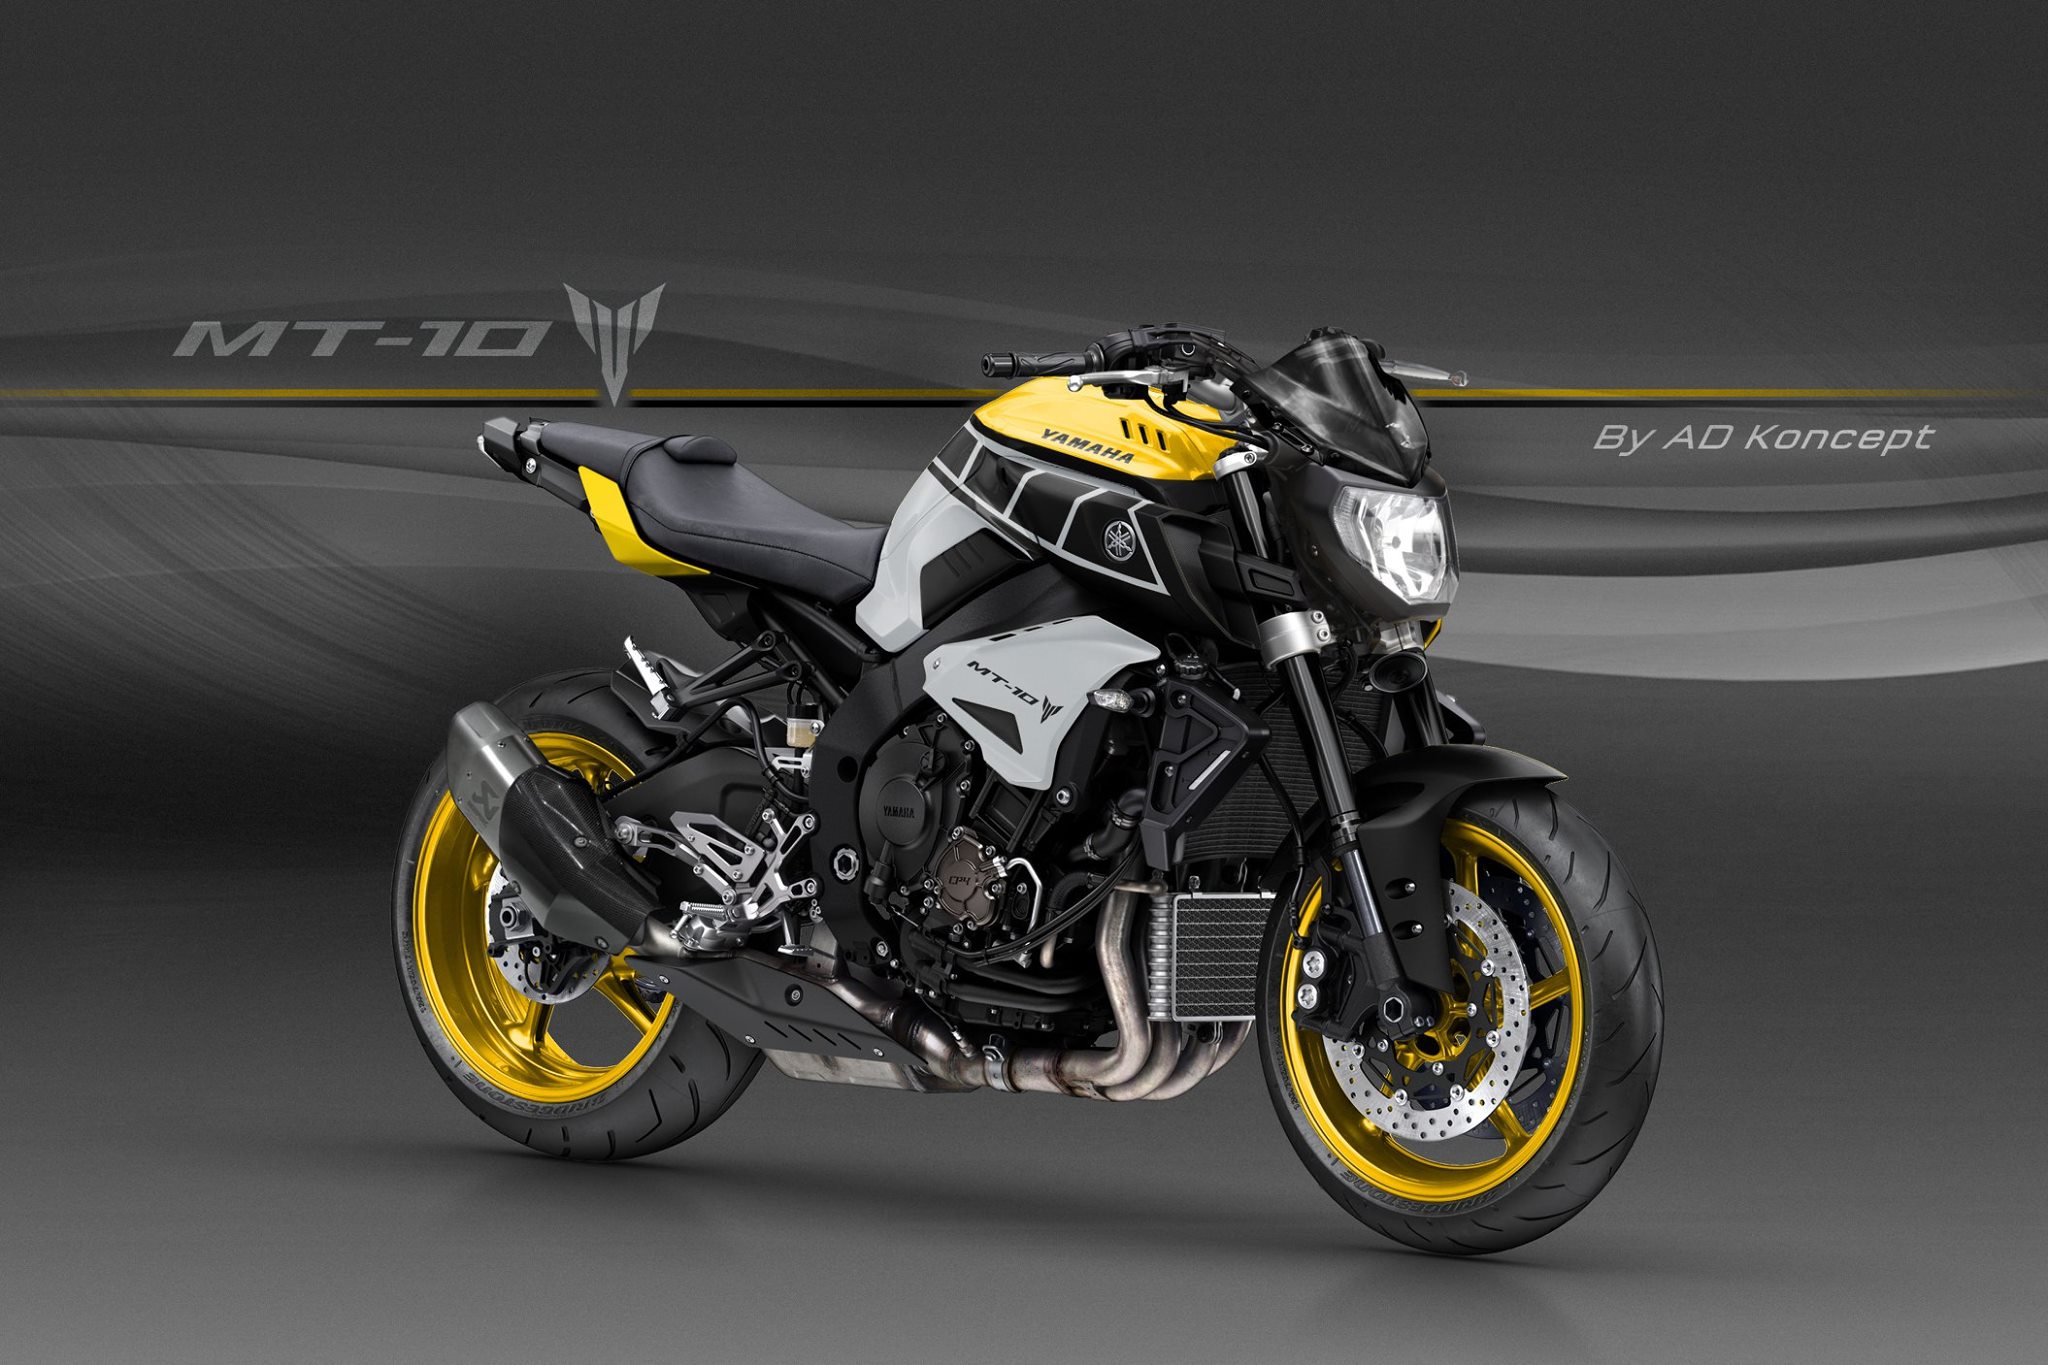 yamaha mt 10 in valentino rossi livery and more from ad koncept 10